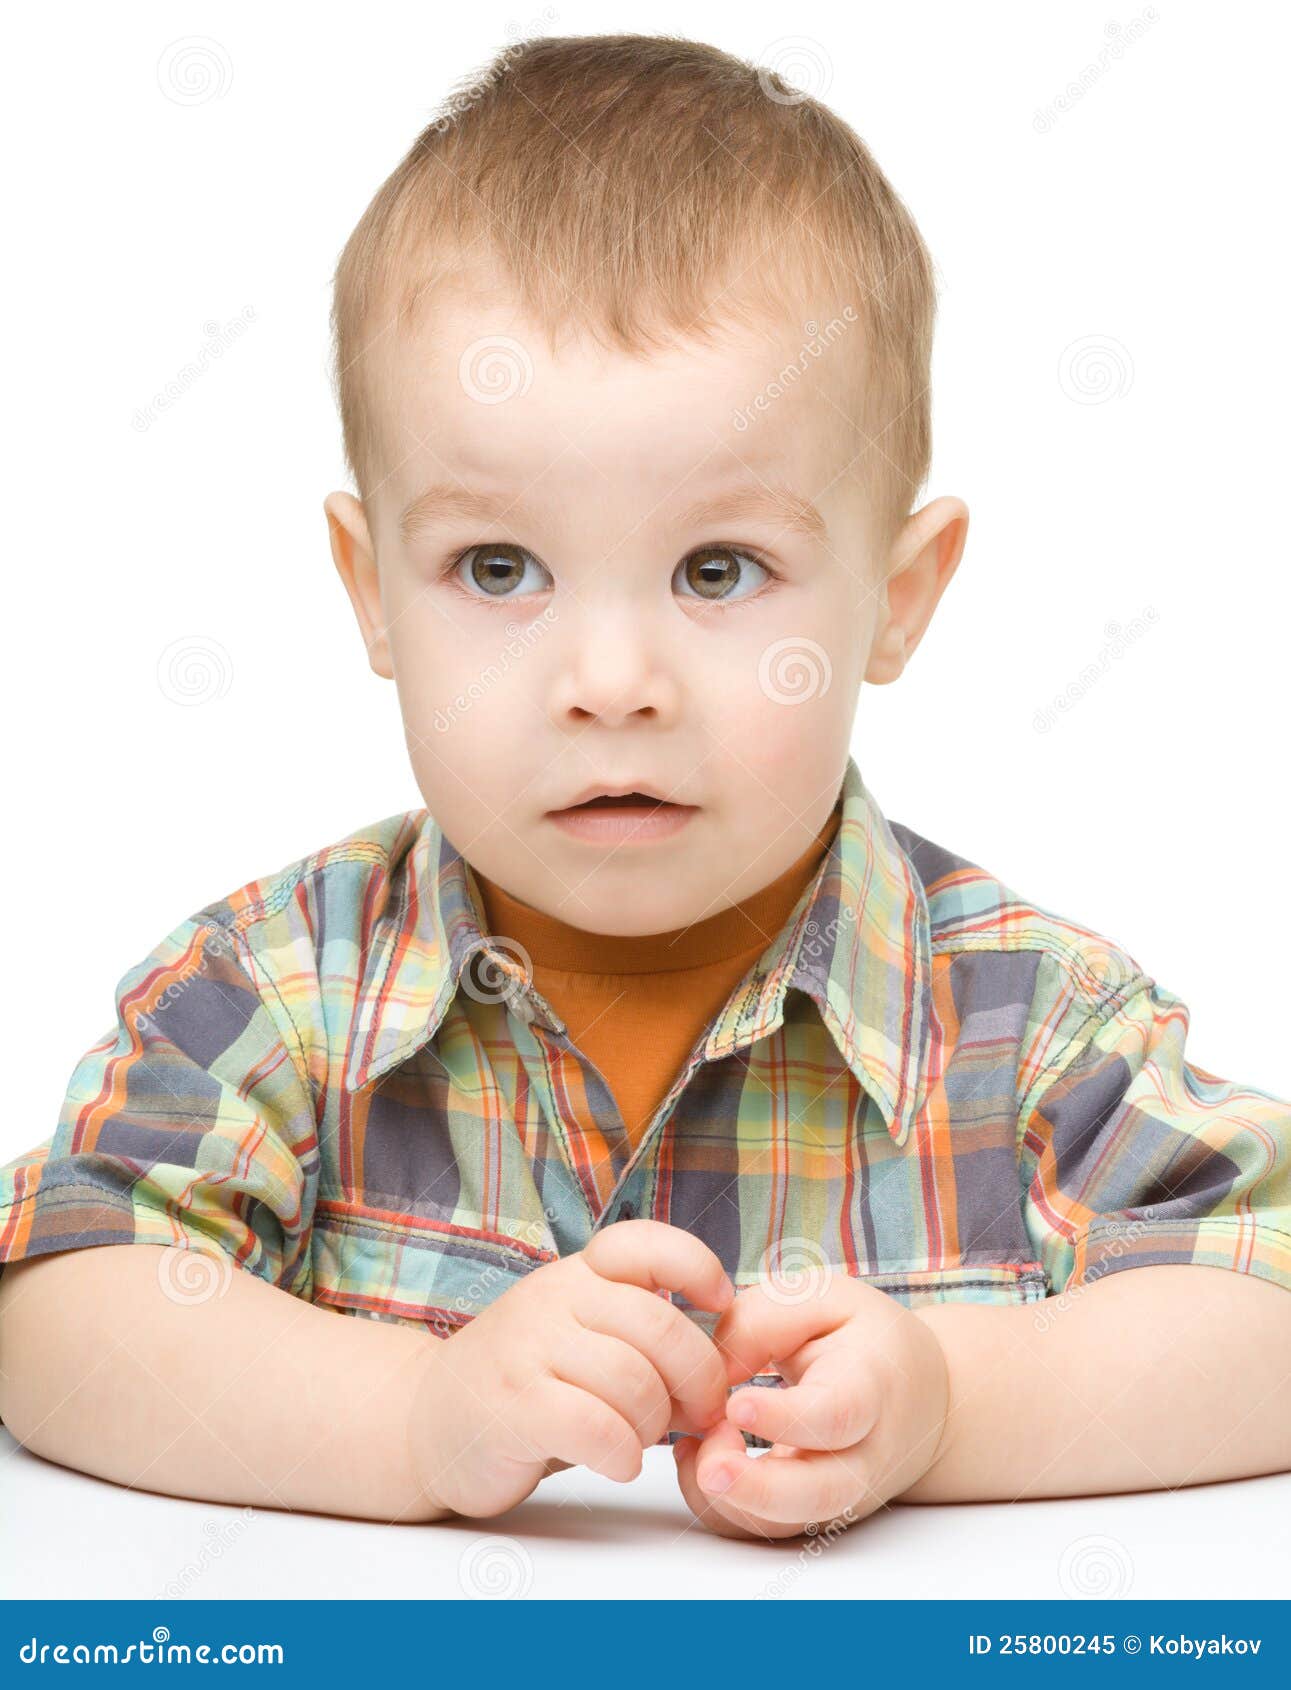 Portrait of a Cute and Pensive Little Boy Stock Image - Image of ...